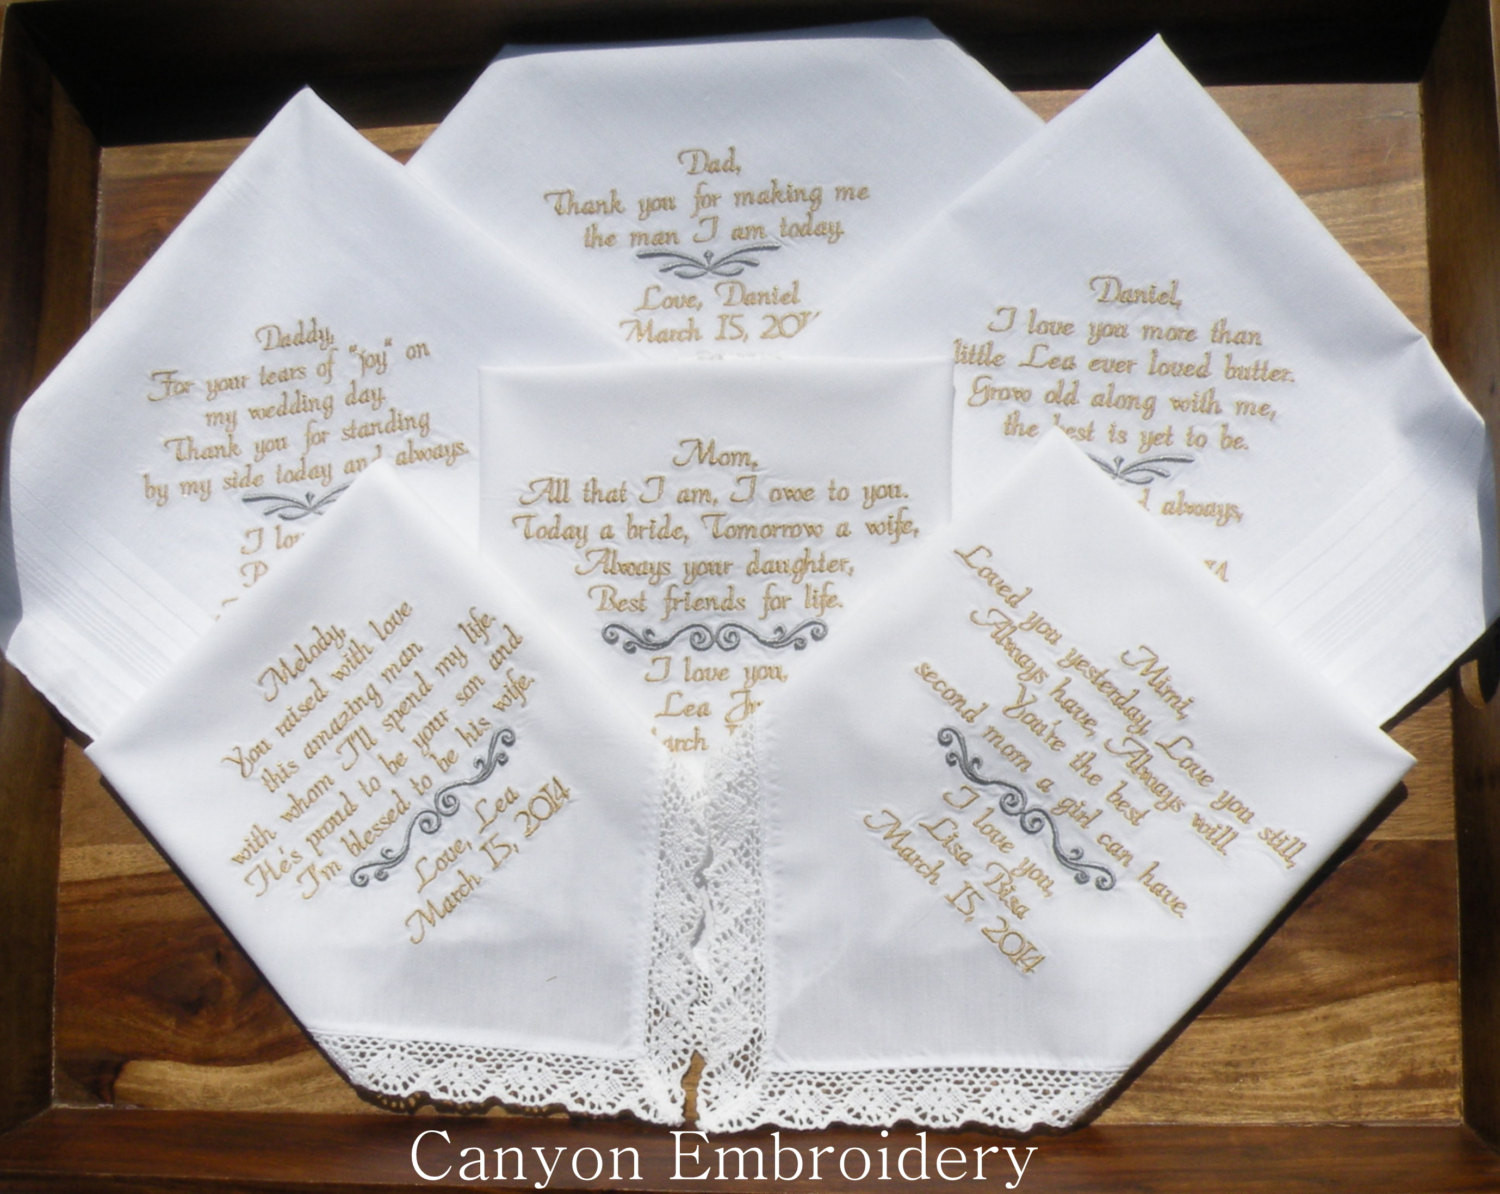 Wedding Embroidery Gift Ideas
 Embroidered Wedding Handkerchiefs Embroidered Wedding Gifts